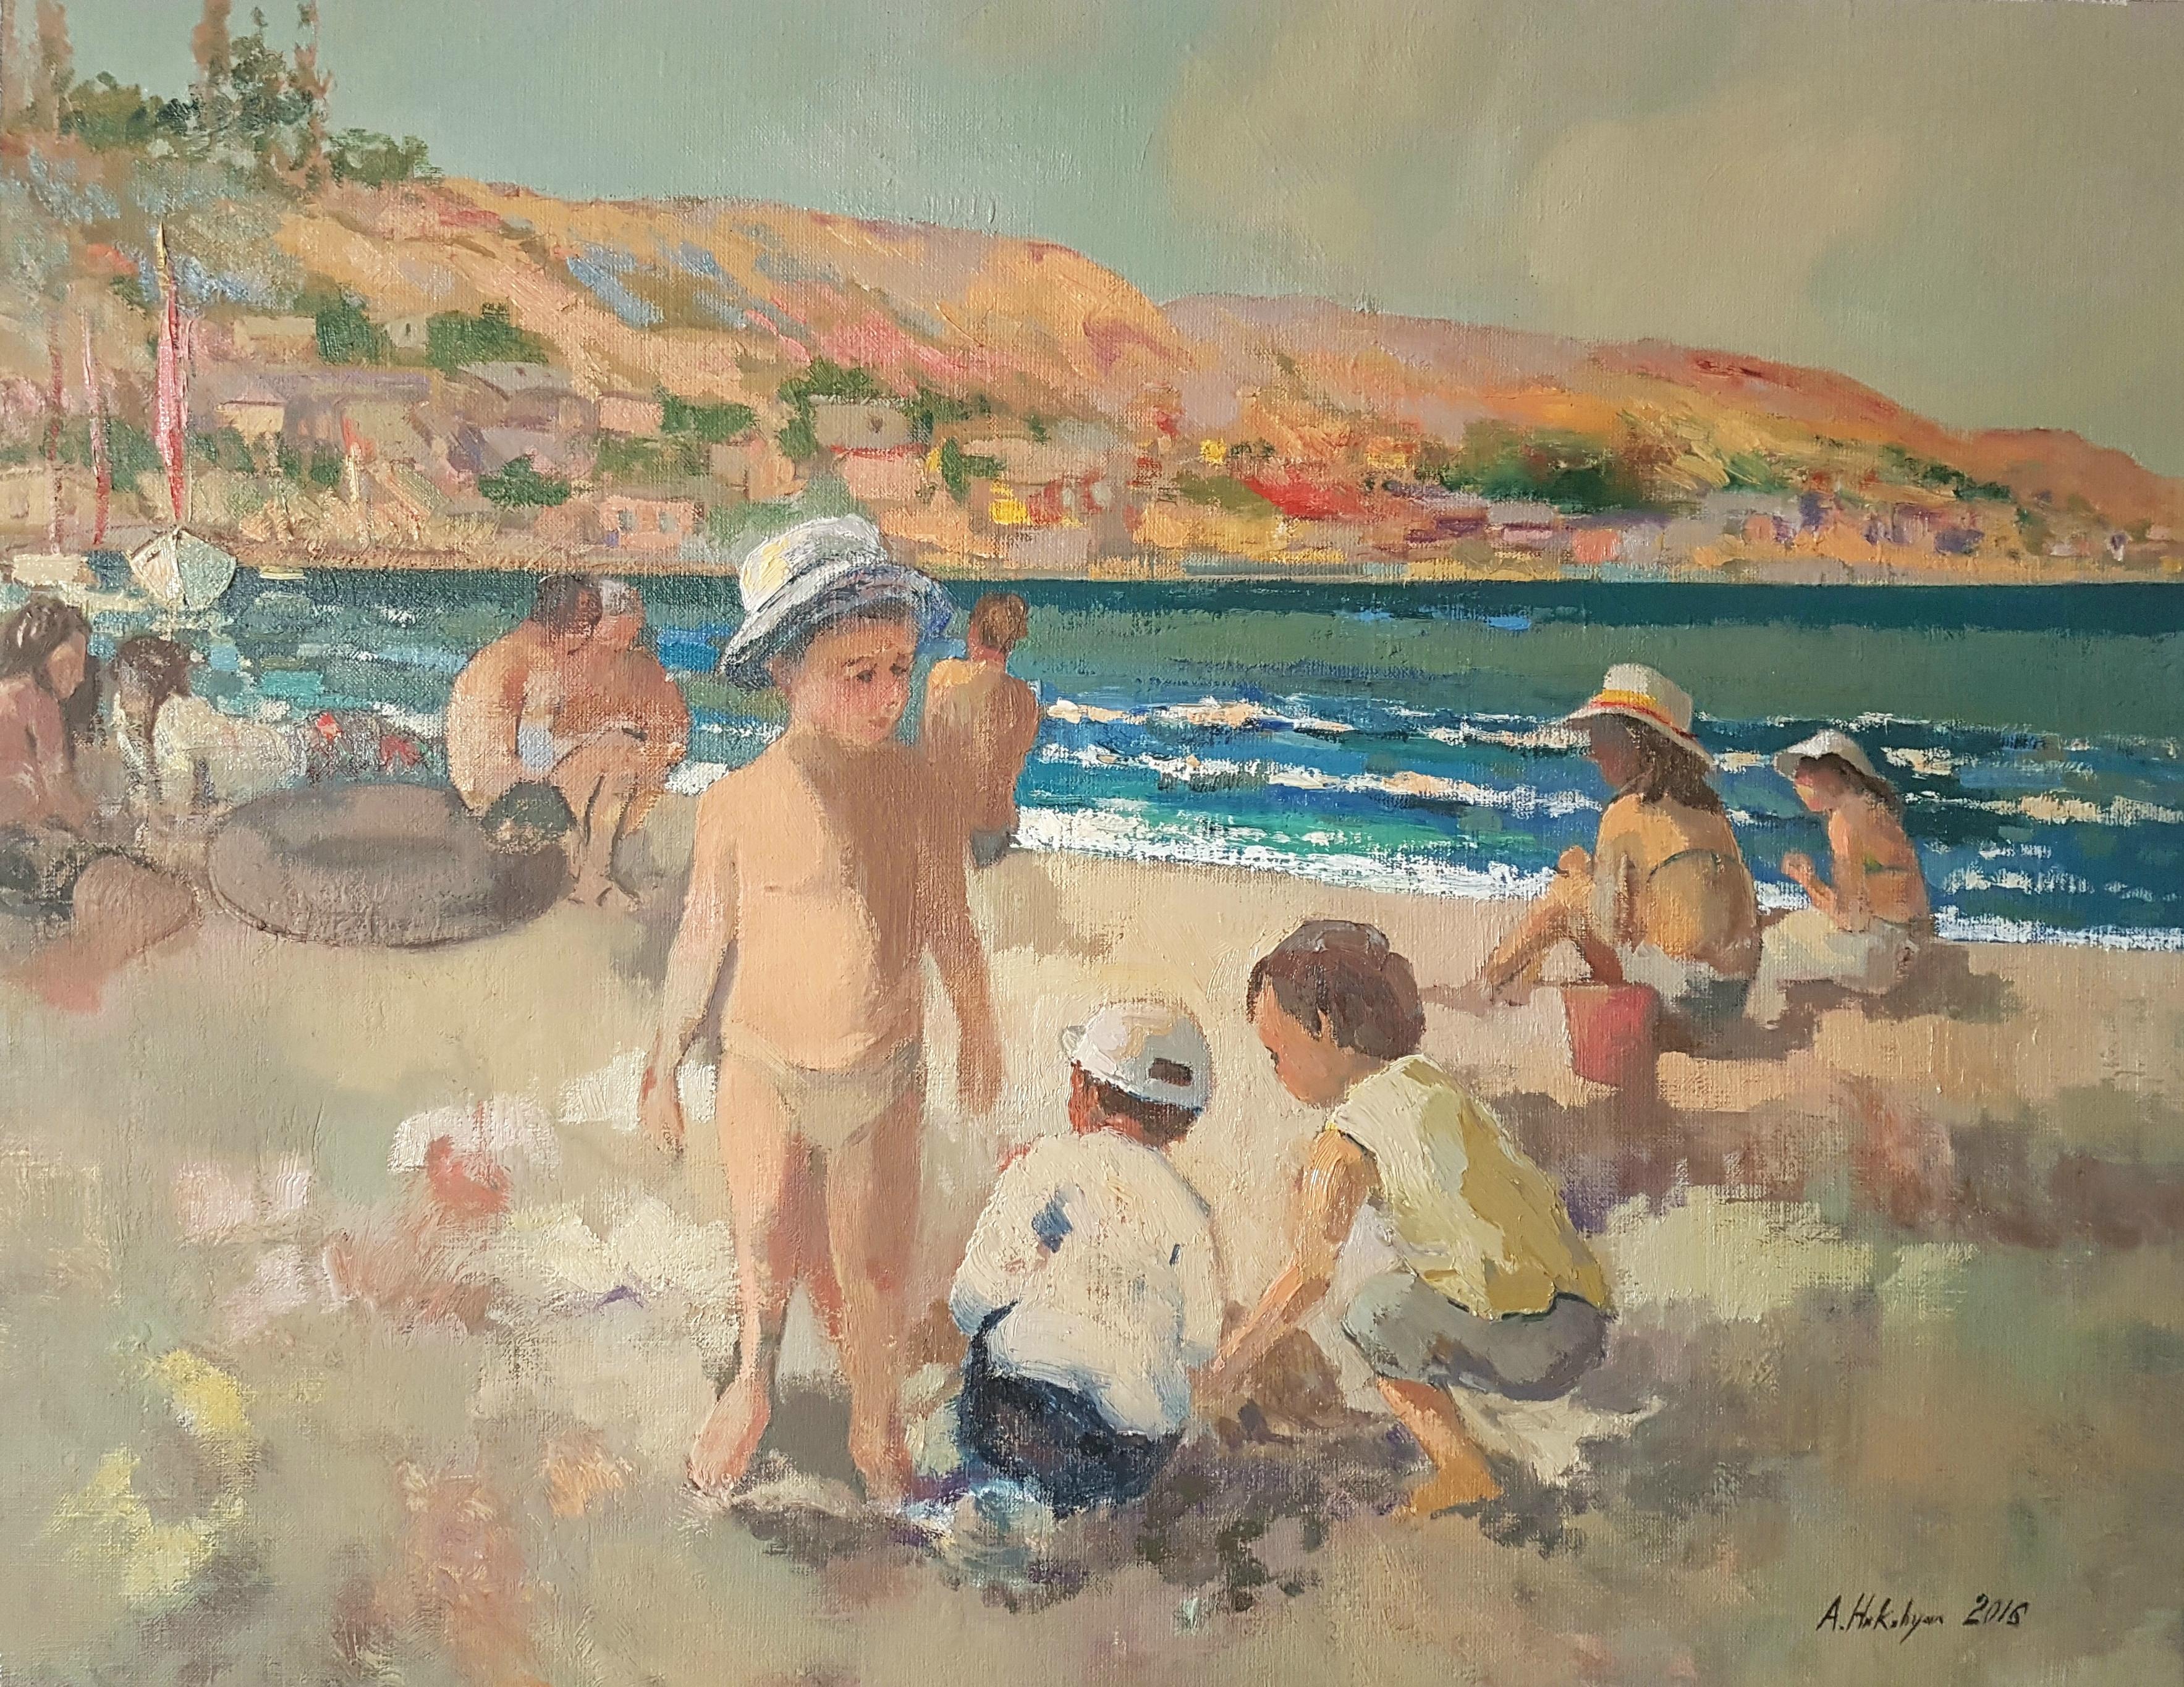 Ara H. Hakobyan Landscape Painting - Playing with Sand, Figurative, Coastal, Original oil Painting, One of a Kind